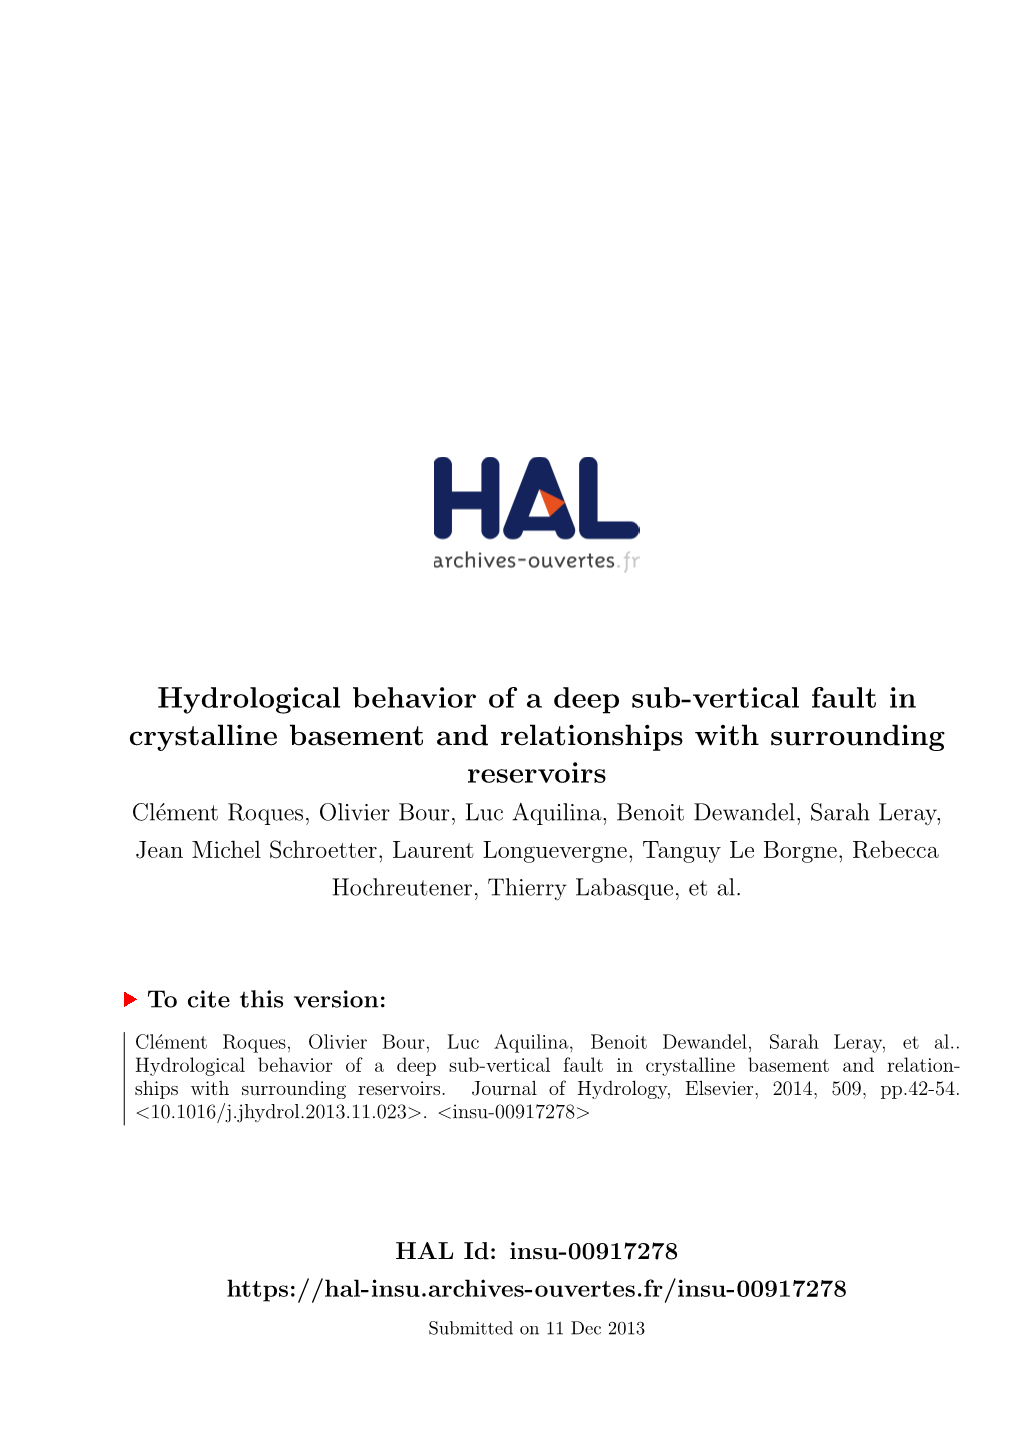 Hydrological Behavior of a Deep Sub-Vertical Fault in Crystalline